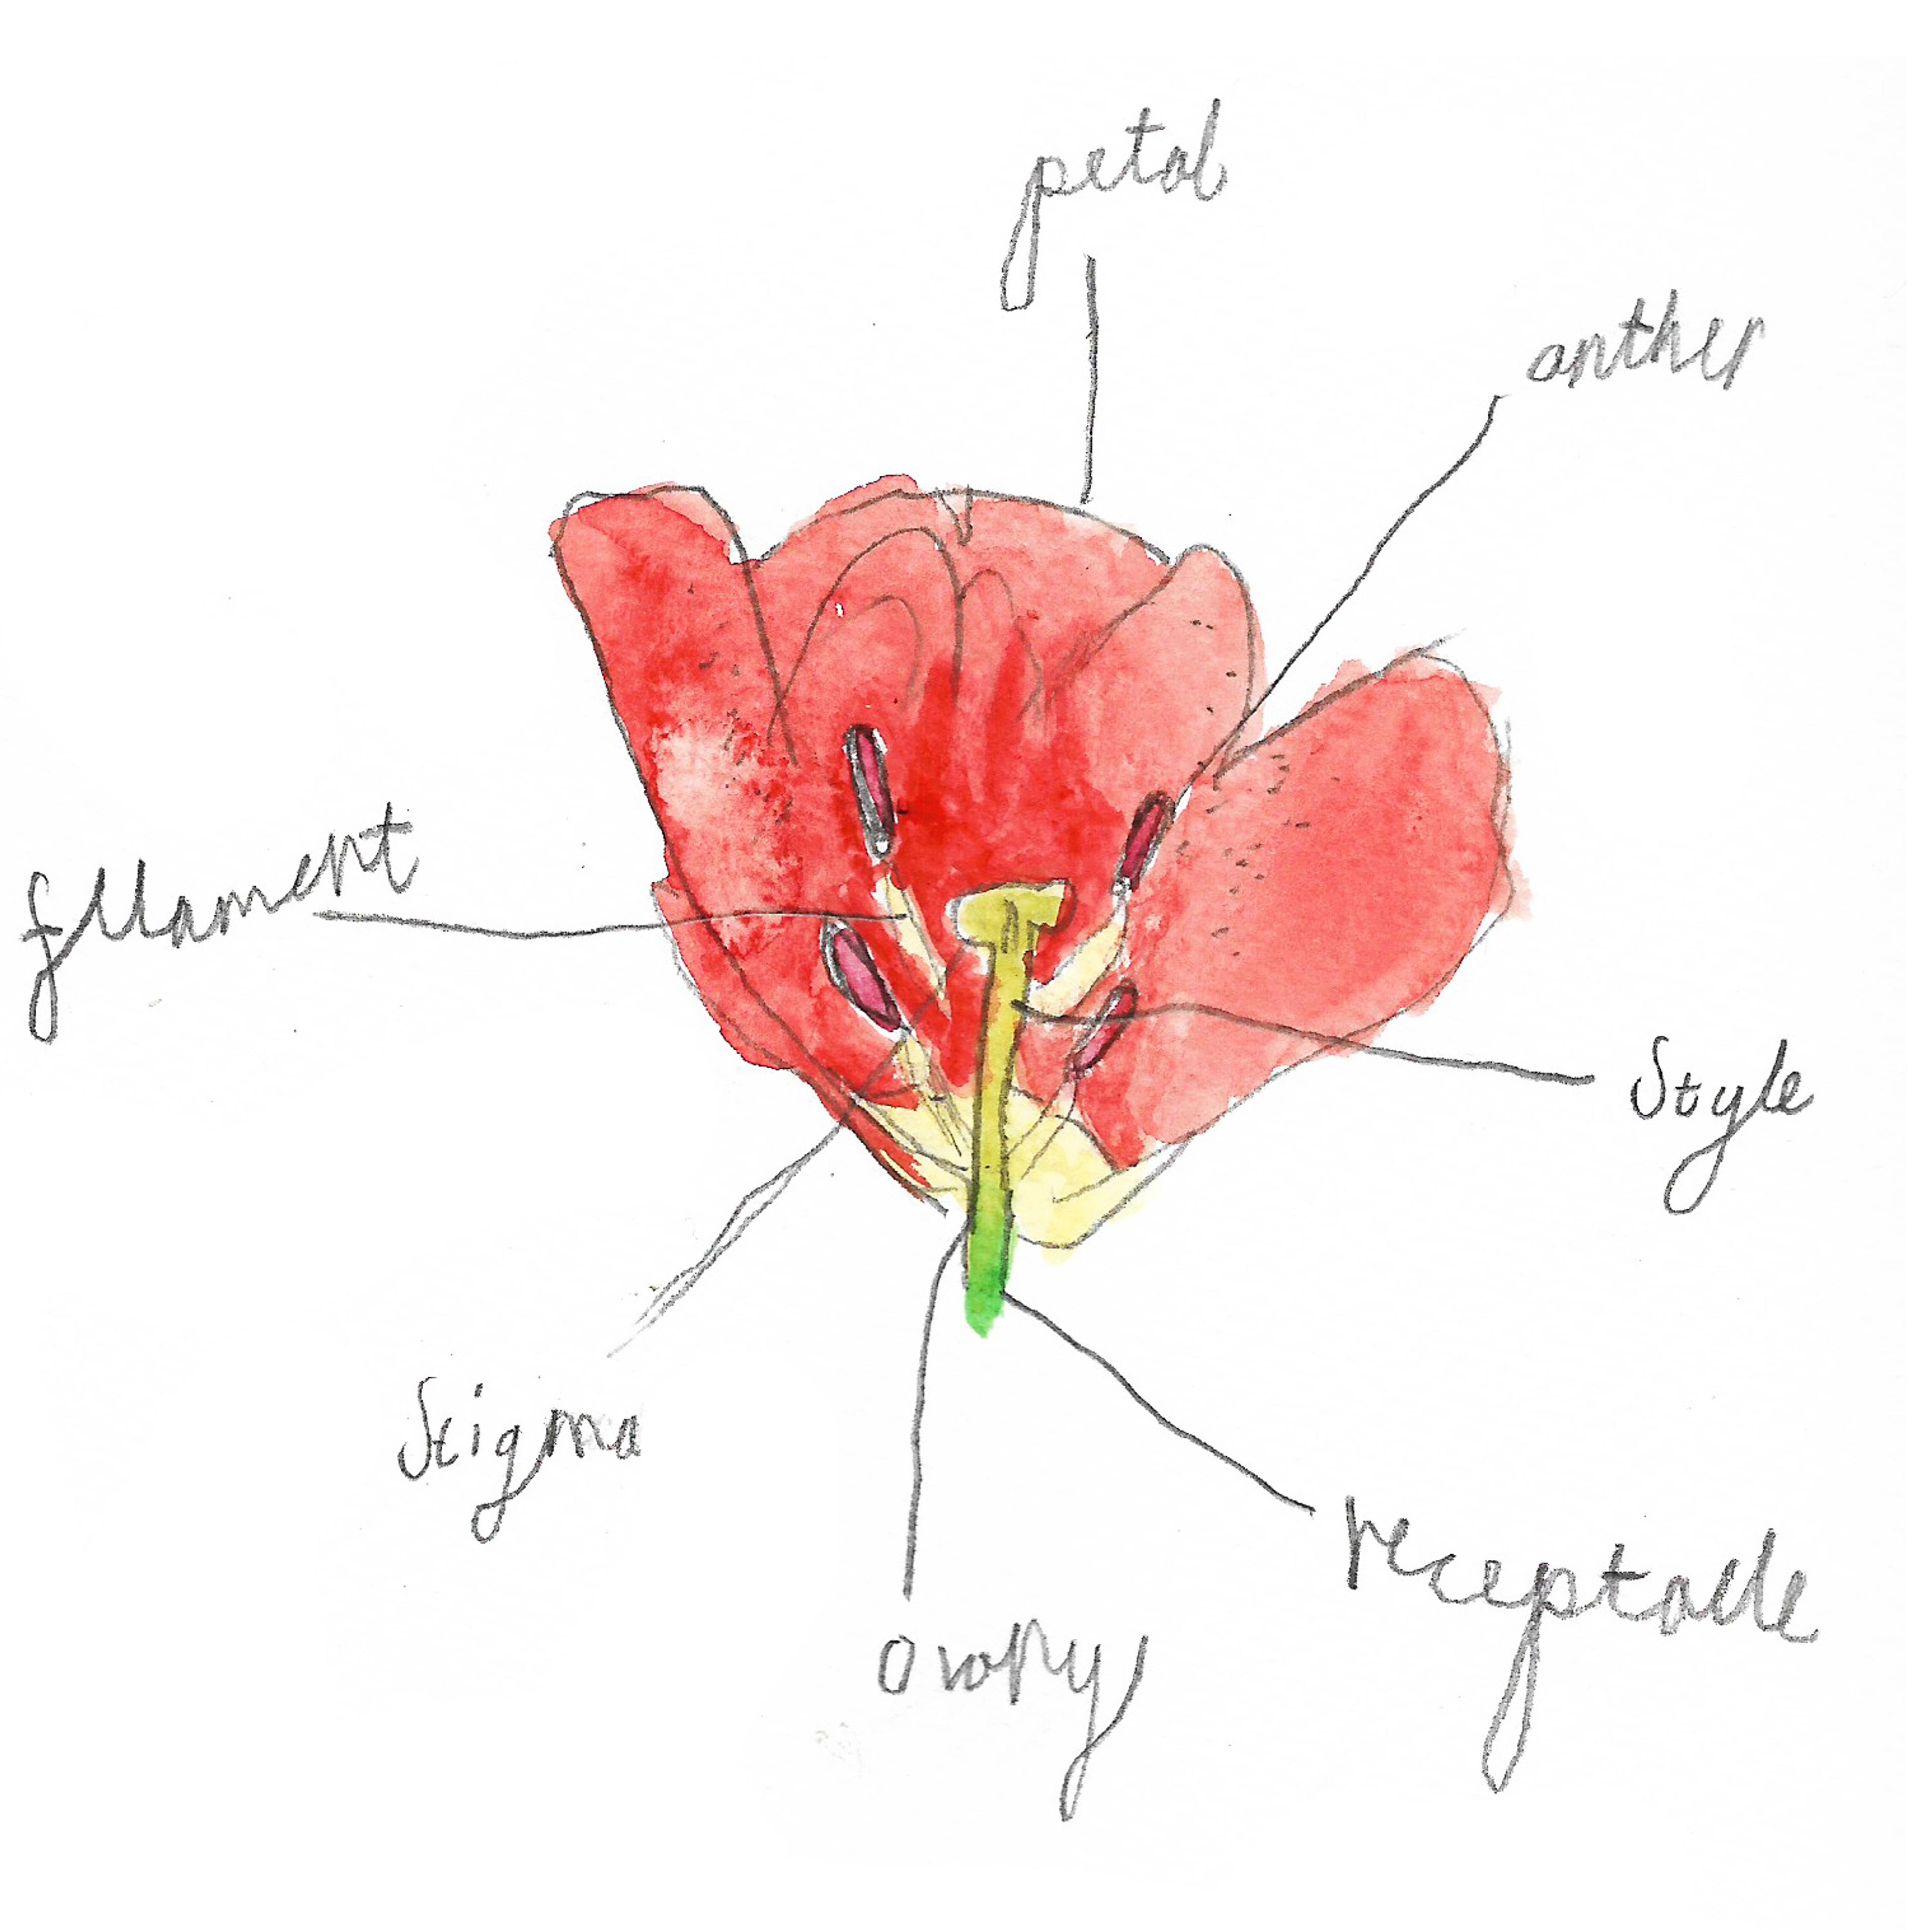 A labelled cross-section of a red flower, painted using watercolour